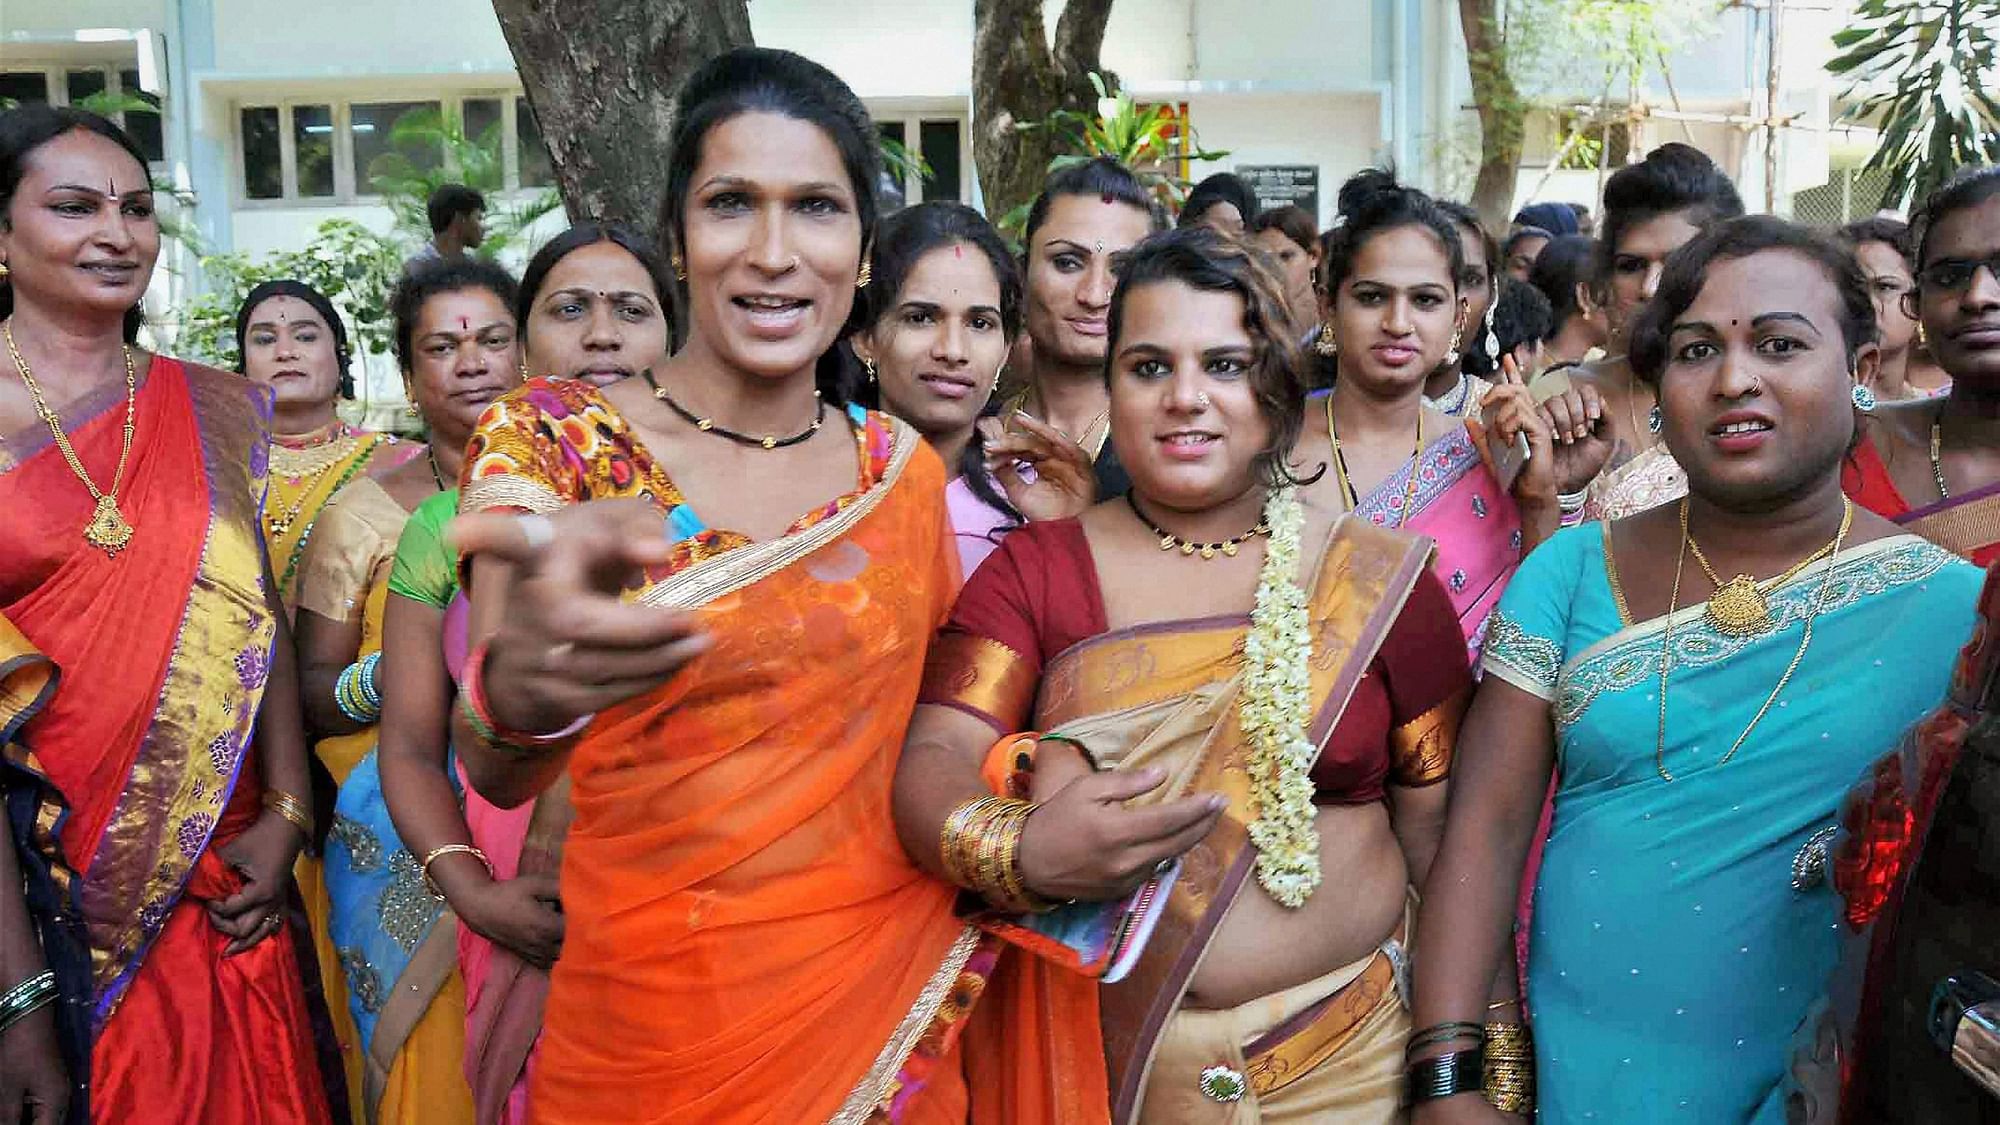  On 15 April 2014, the Supreme Court of India delivered the historic judgment that recognised the trans persons as ‘the third gender’.&nbsp;